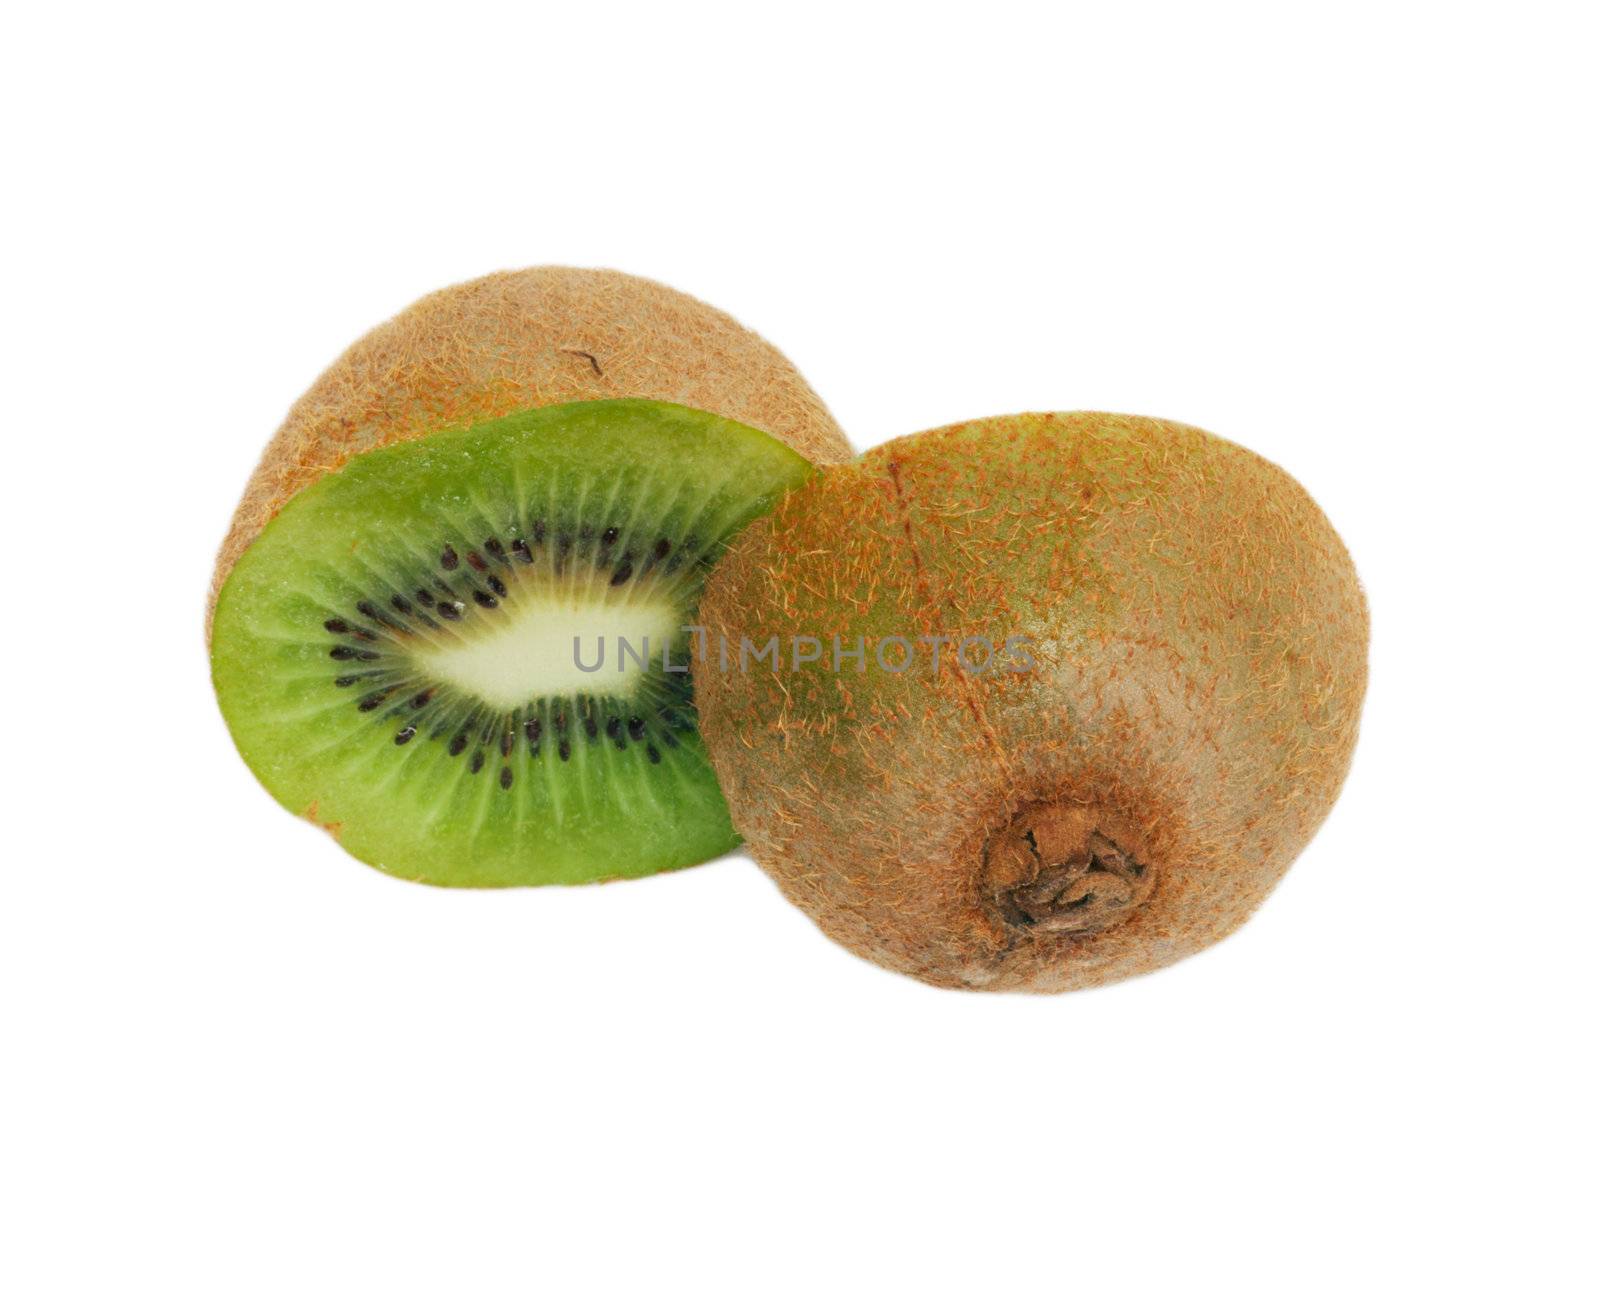 pieces of kiwi isolated on white background  by schankz